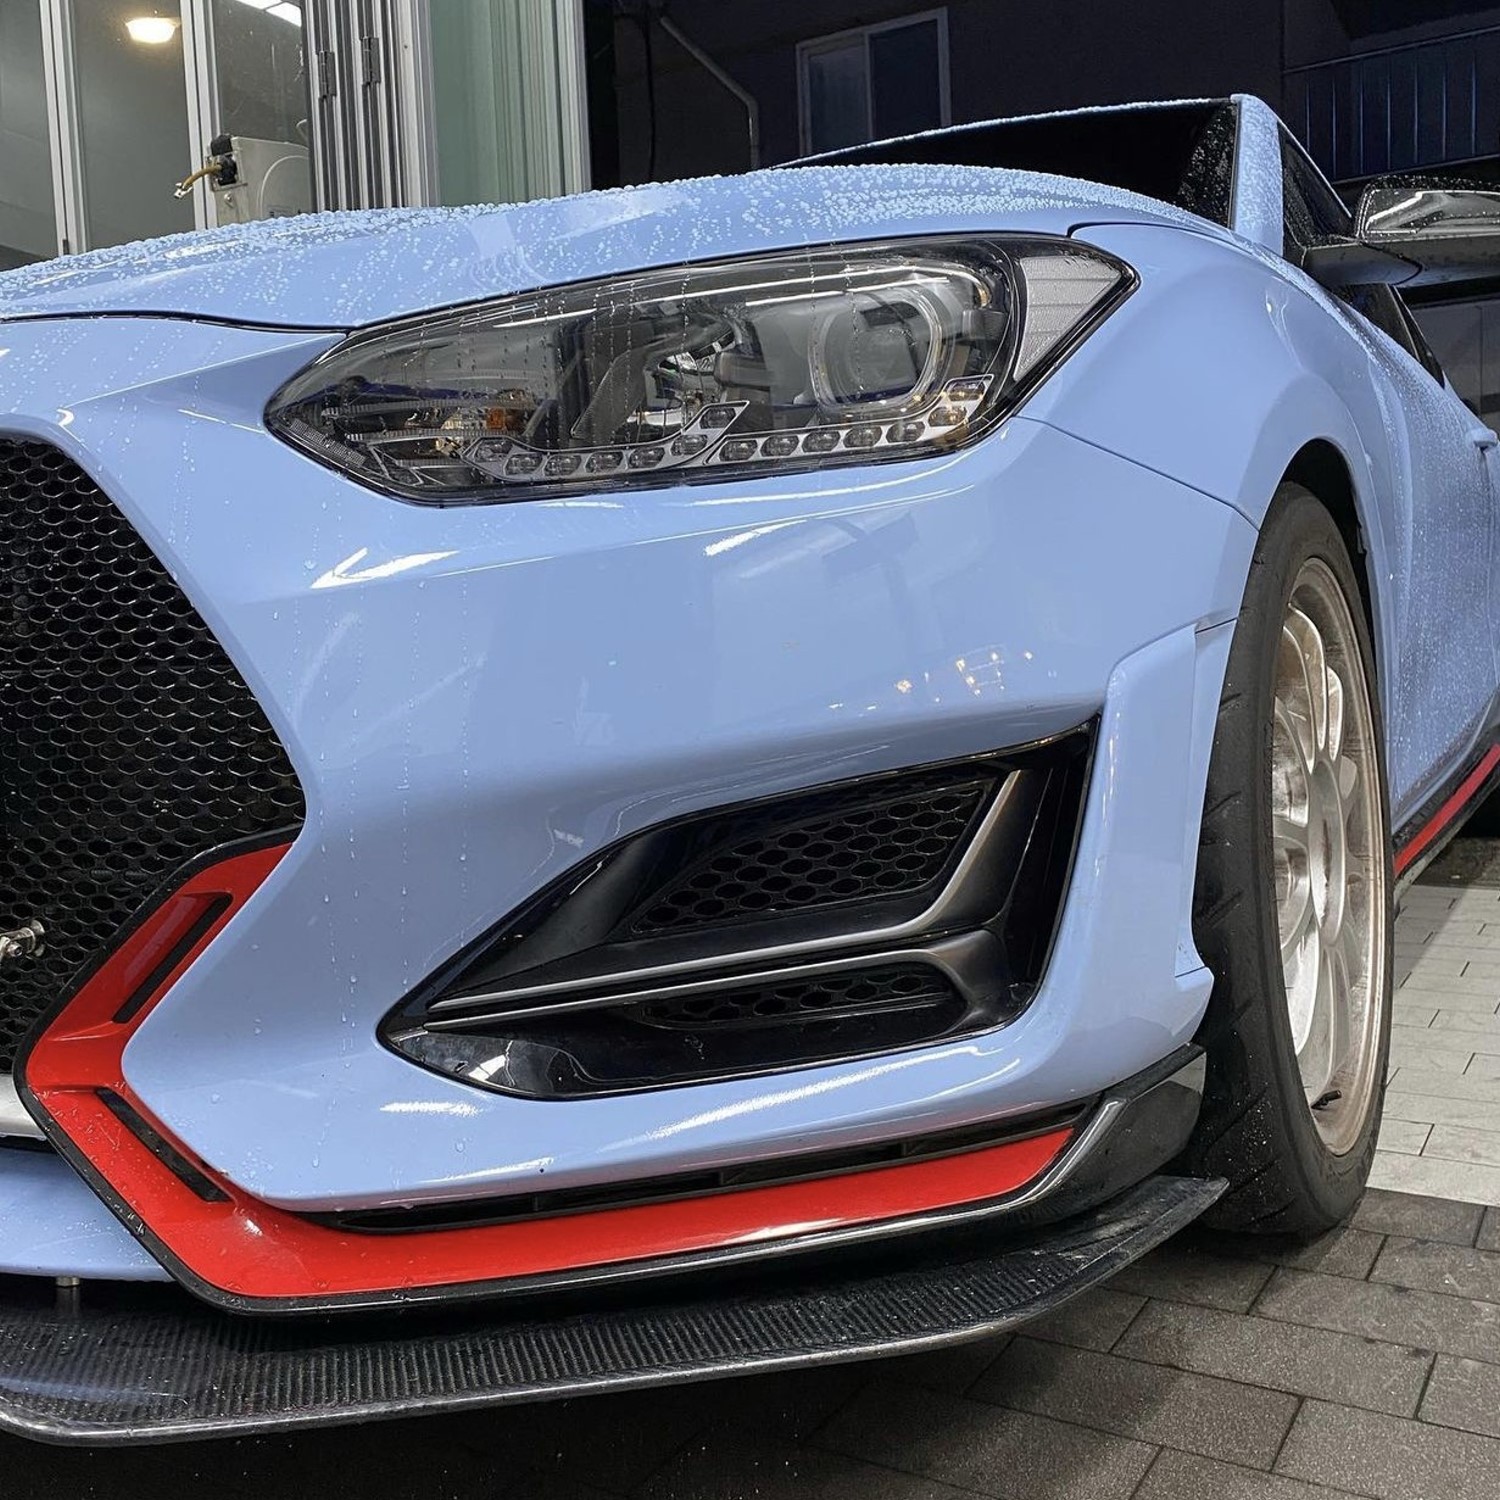 Grille Mods Around The World - Hyundai Veloster N in South Korea and more!